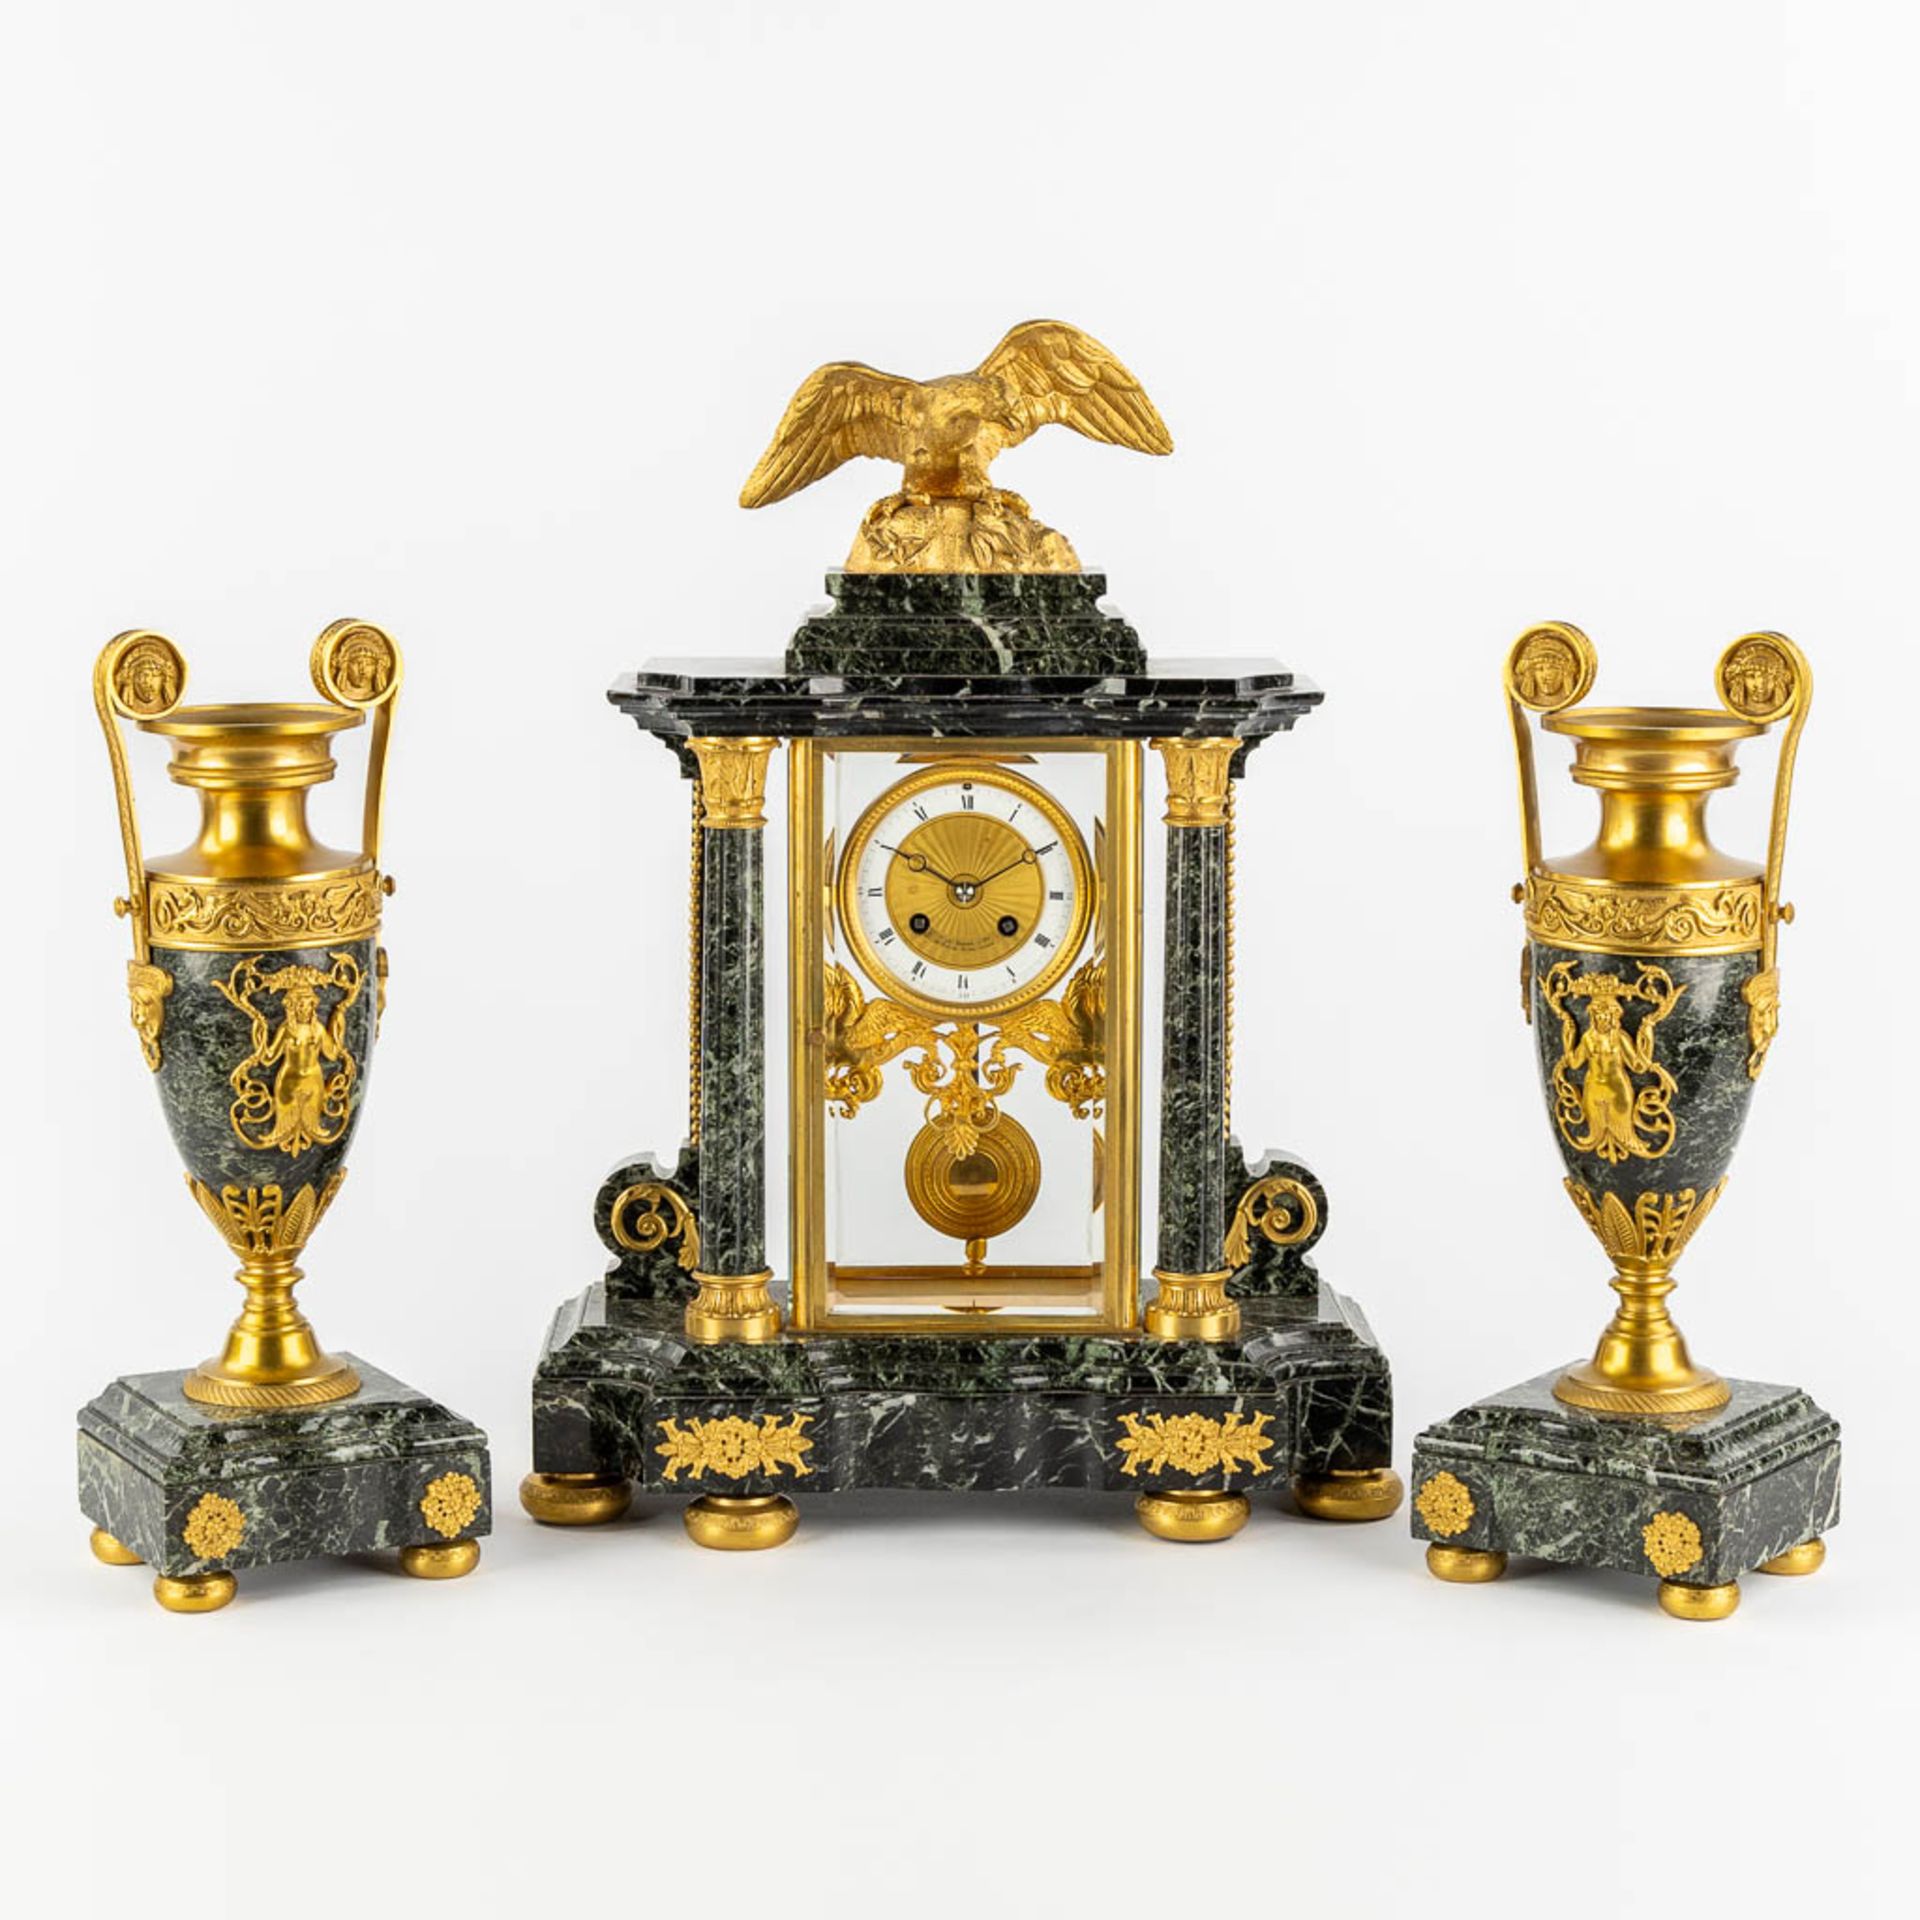 A three-piece mantle garniture clock and urns, gilt bronze on green marble, Empire style. France, 19